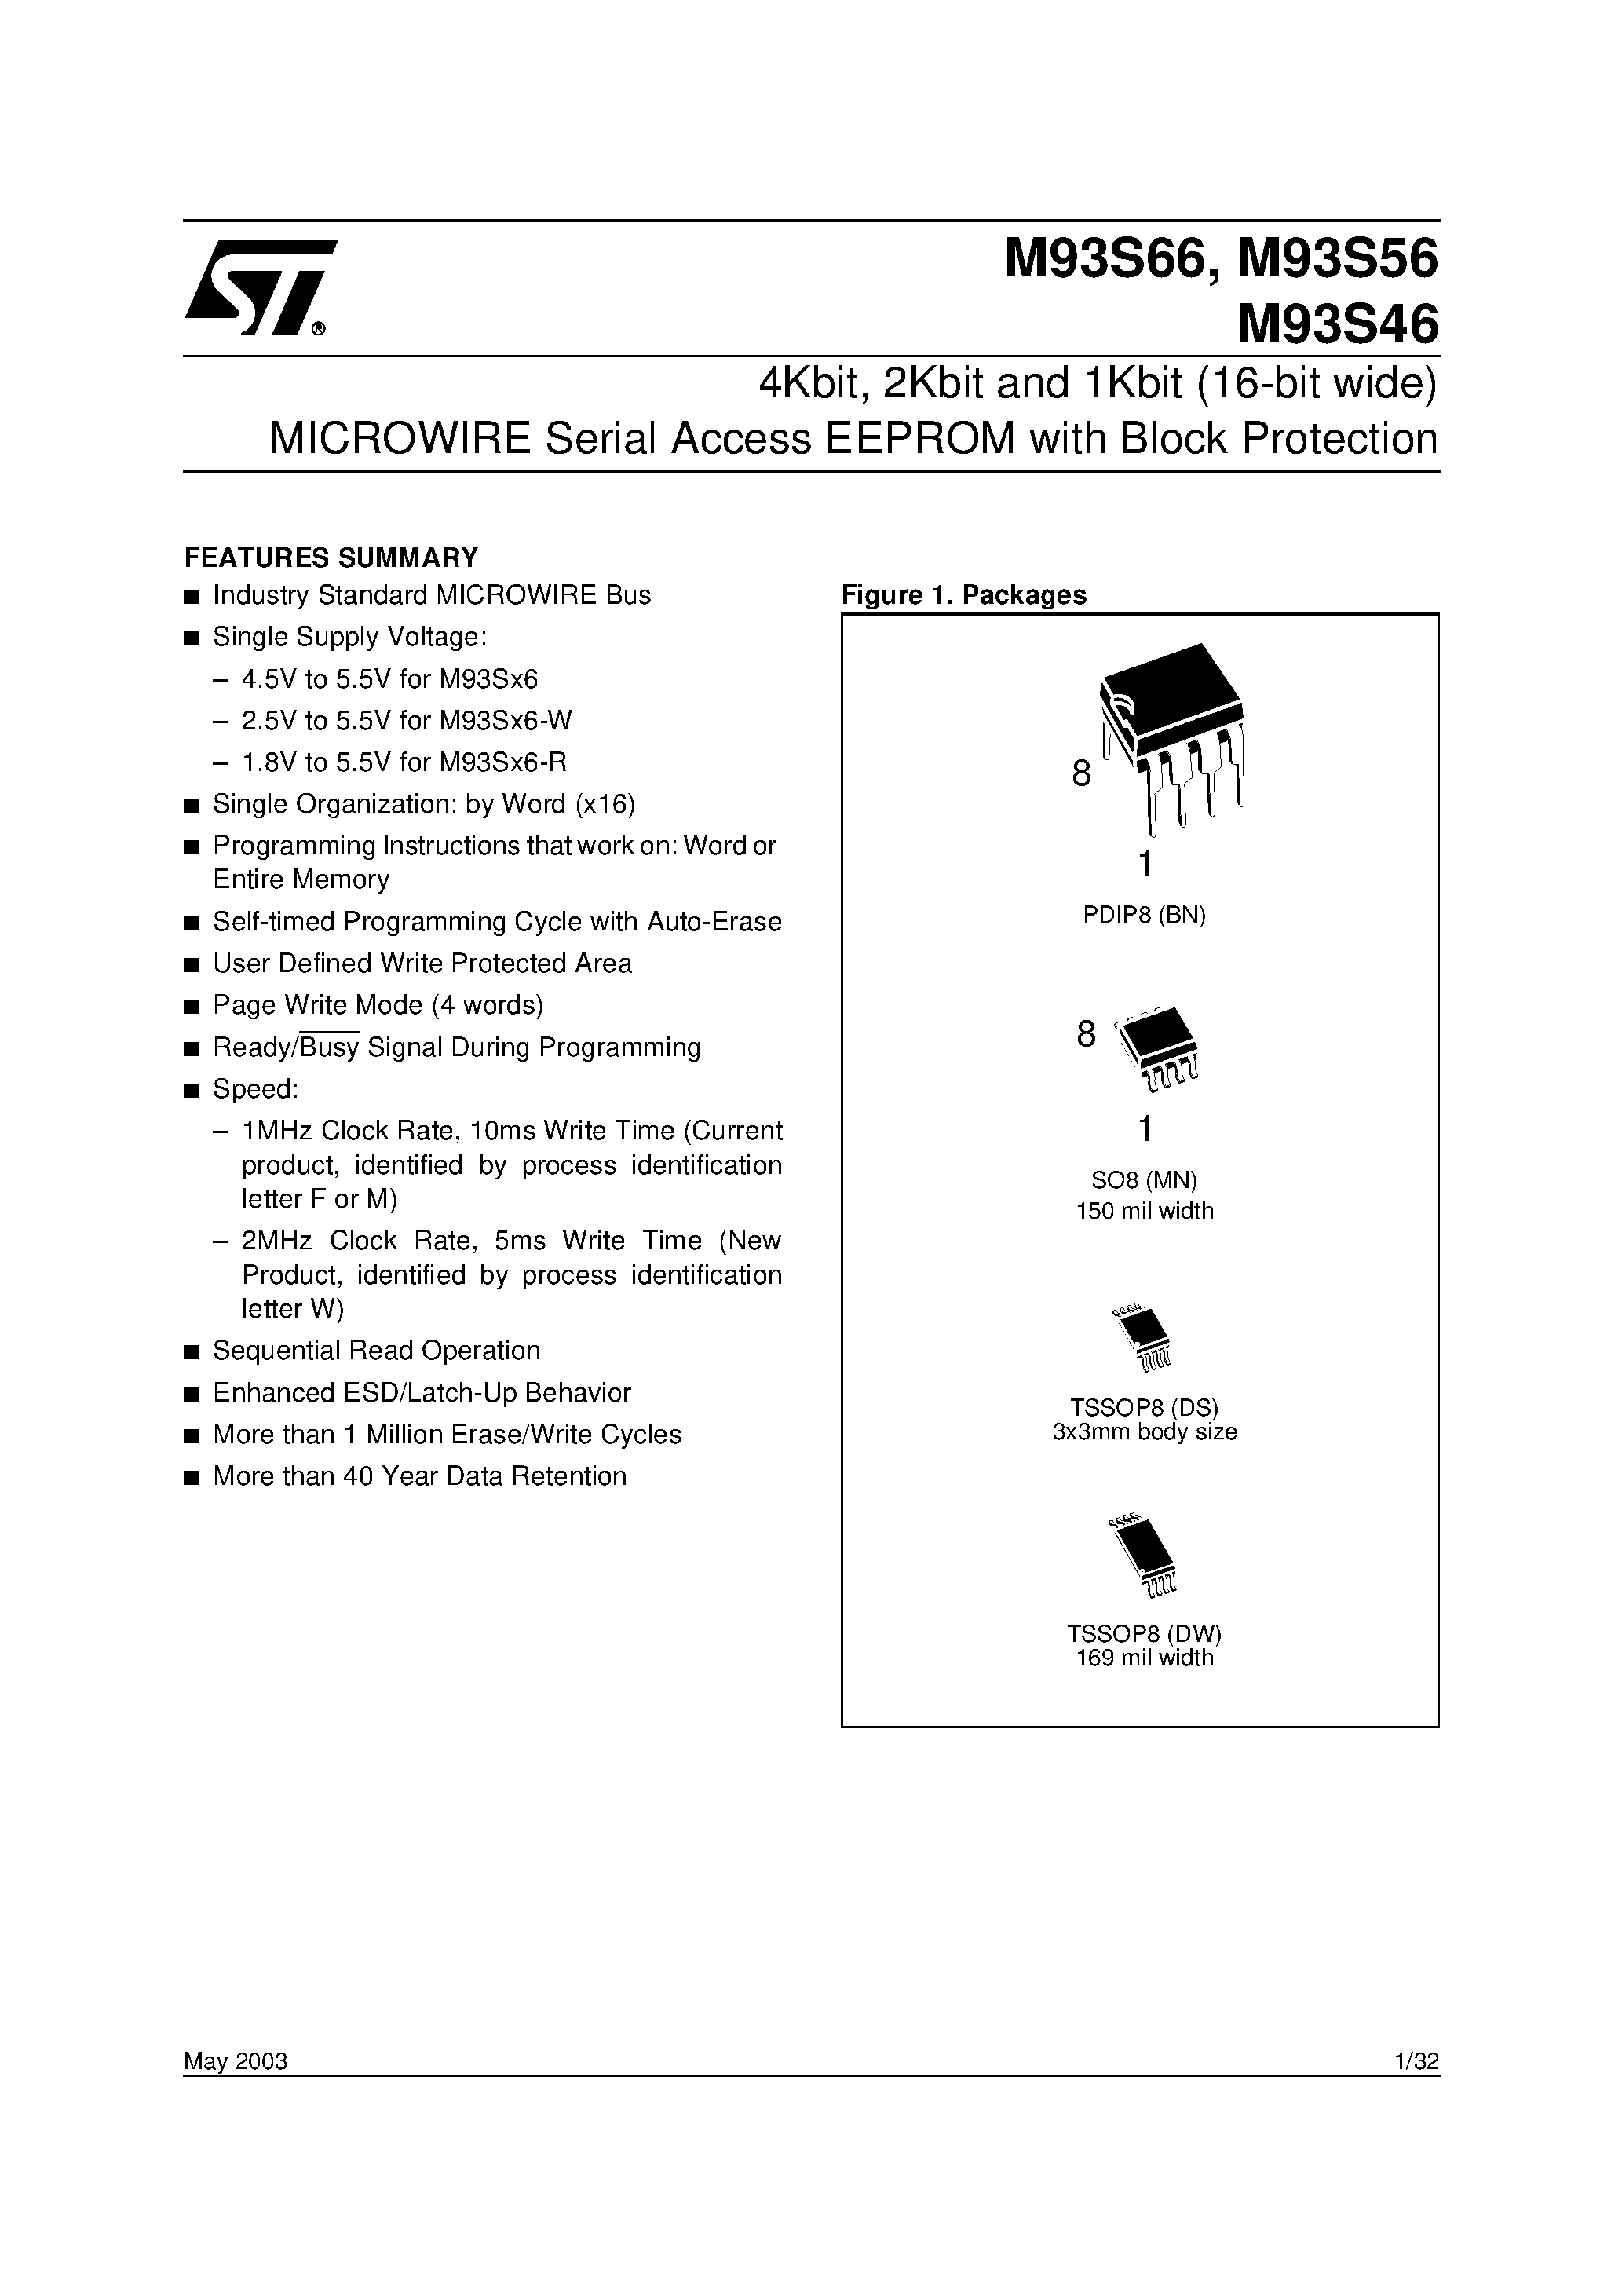 Datasheet M93S66 - 4Kbit / 2Kbit and 1Kbit 16-bit wide MICROWIRE Serial Access EEPROM with Block Protection page 1